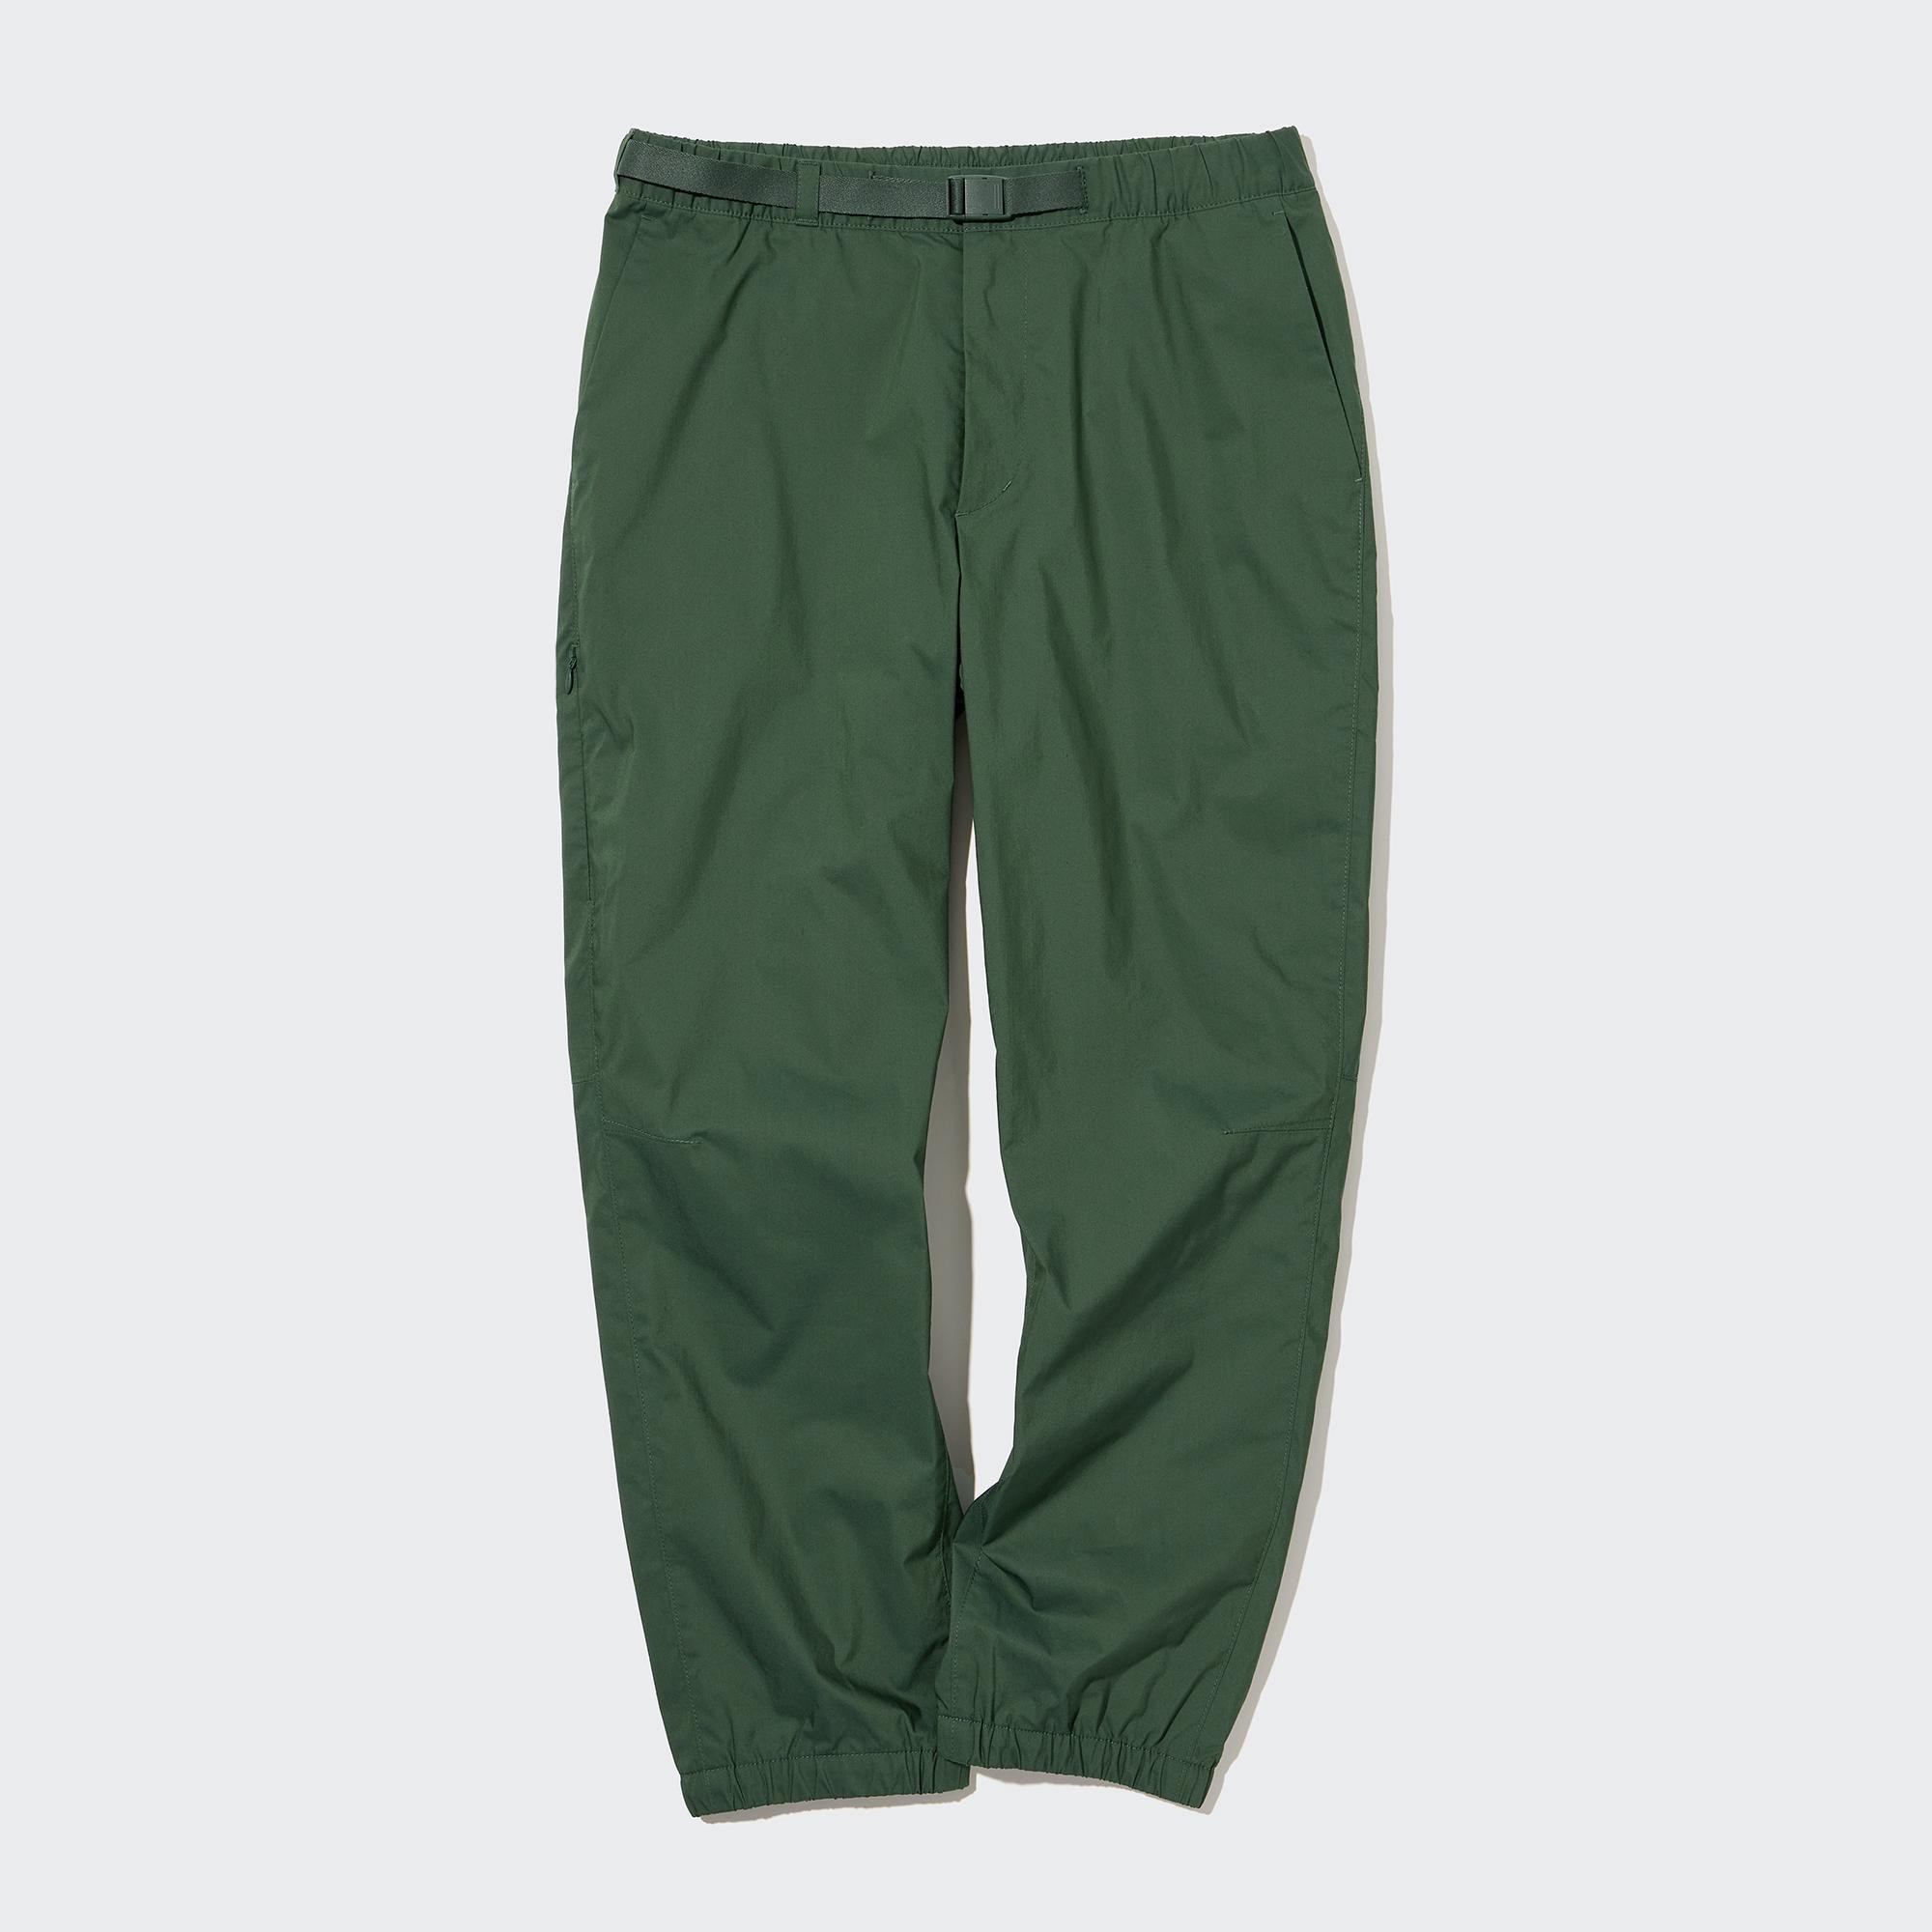 Buy Uniqlo Heattech Warm Easy Pants Cargo Leg Length 72 78cm at affordable  prices — free shipping, real reviews with photos — Joom